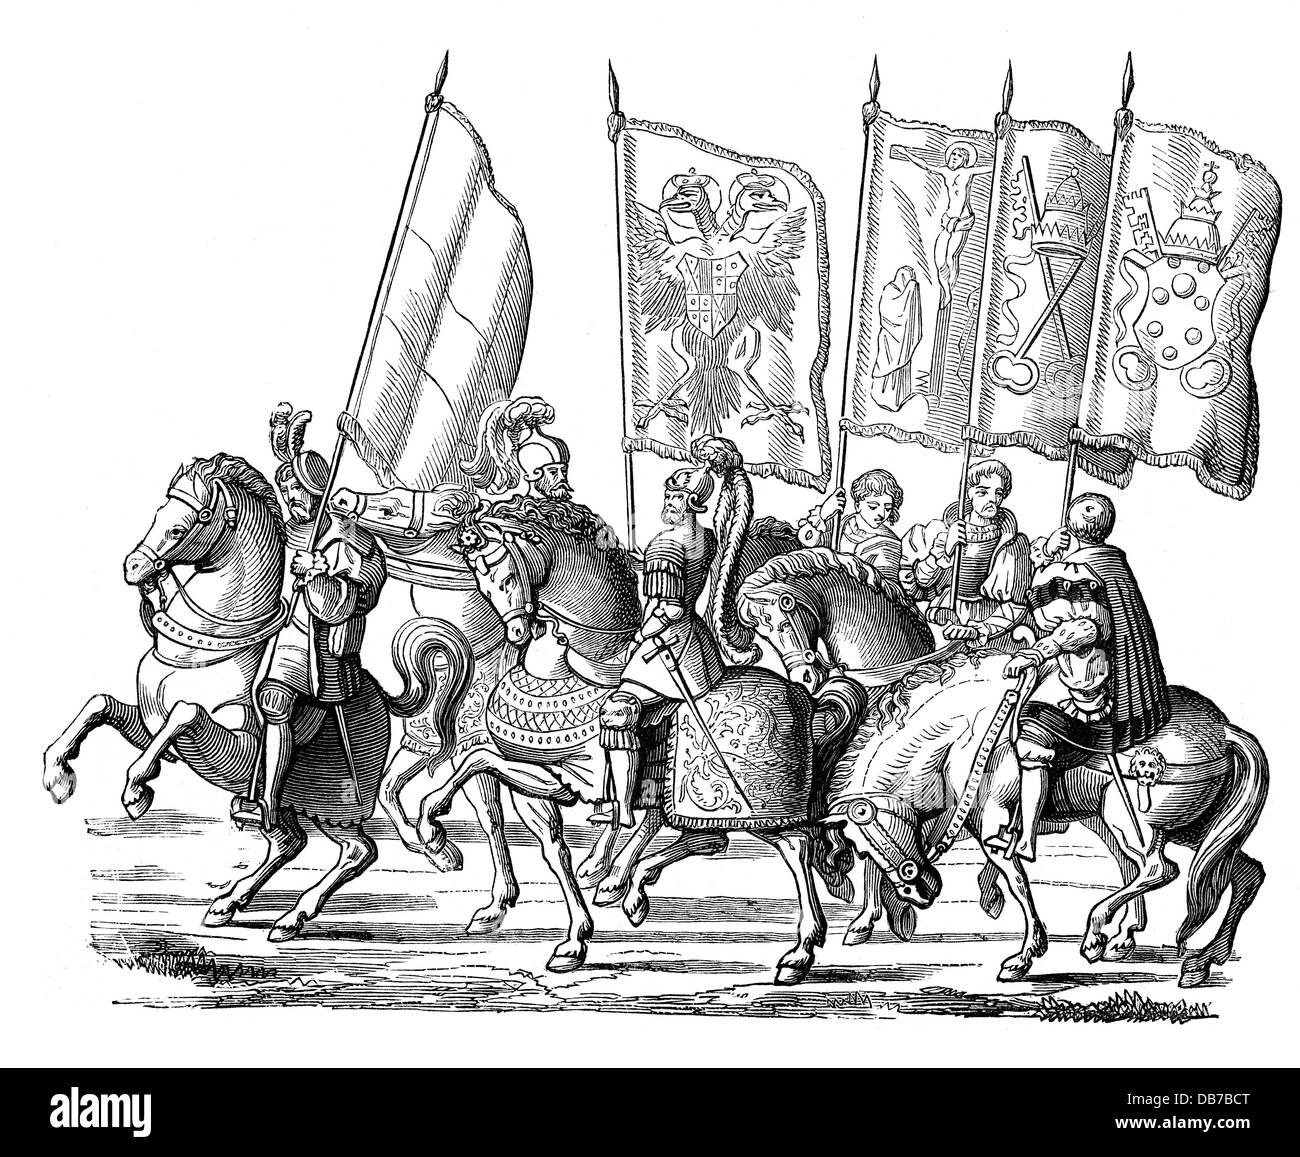 War of the League of Cognac 1526 - 1530, coronation of Charles V to the Roman Emperor and King of Italy, 1530, standard bearers of Charles and of the church during entry in Bologna, after contemporary fresco of Domenico Brusasorci, wood engraving, 19th century, flag, flags, banner, banners, standard-bearer, standard-bearers, Holy Roman Empire, Papal States, Pope Clement VII, politics, policy, coat of arms, Habsburg, Medici, Spain, Austria, Italy, 16th century, historic, historical, people, Additional-Rights-Clearences-Not Available Stock Photo